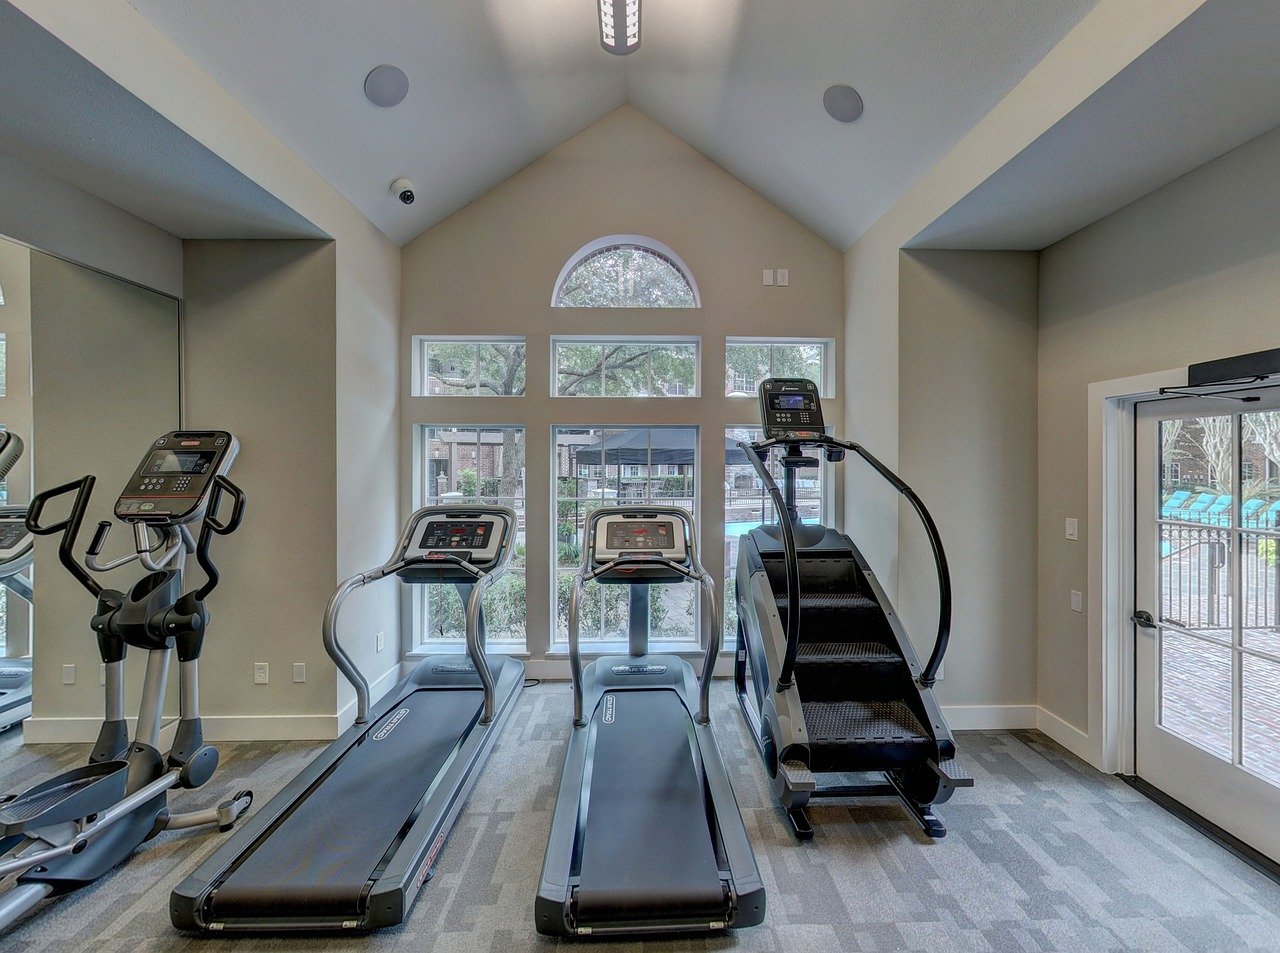 Several home devices like treadmills for exercising.